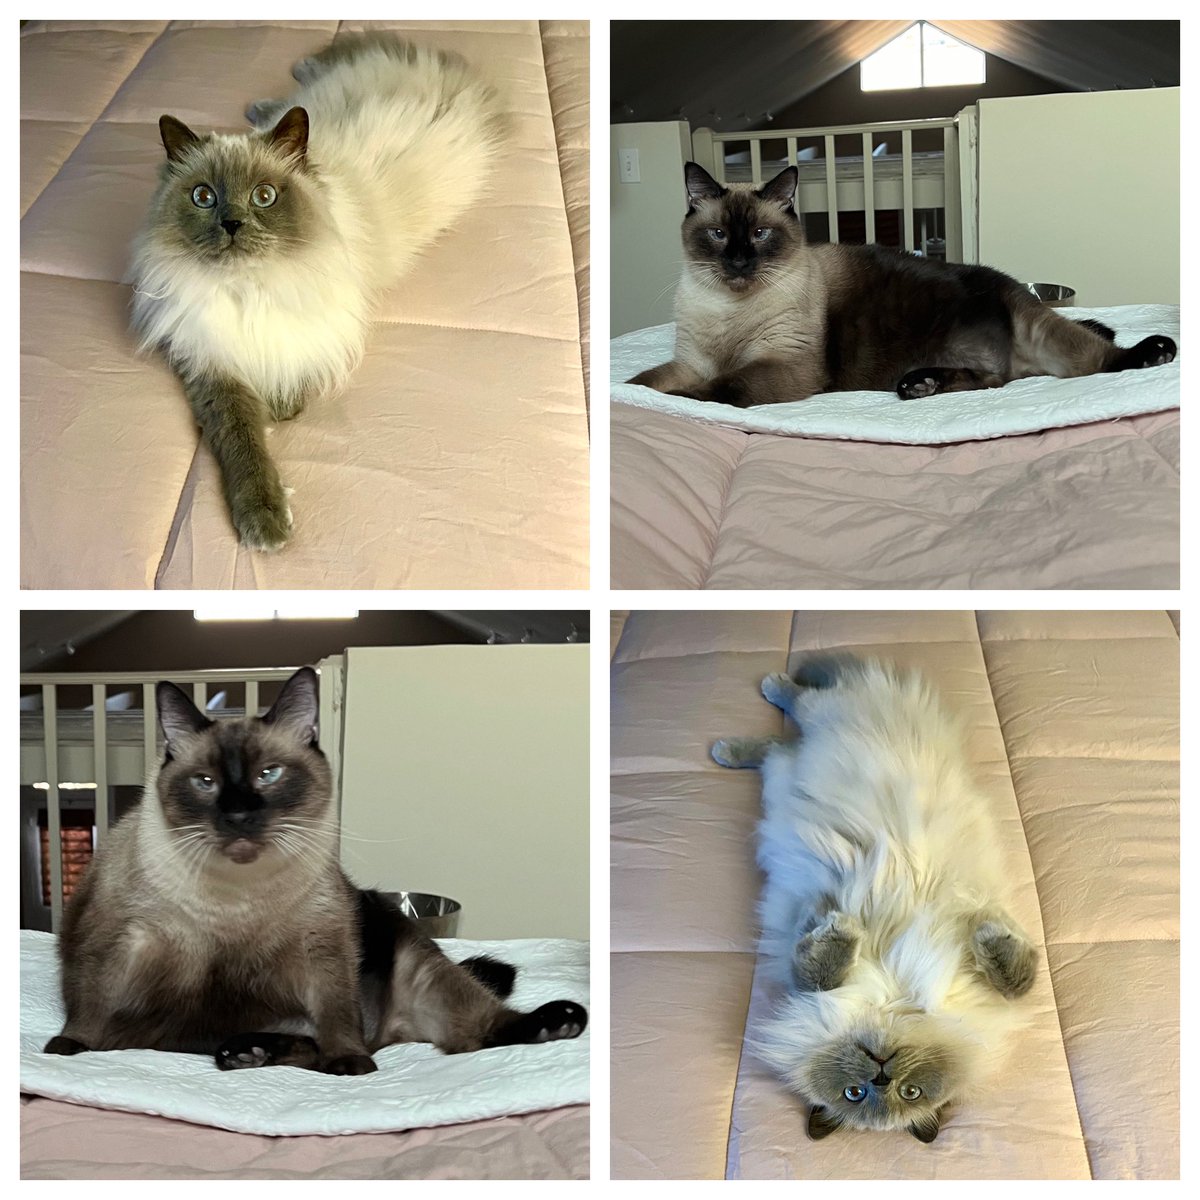 Happy National Pet Day to my fluffy little loves Samantha and Huey P! #NationalPetDay #ragdollcat #siamesecat #catsrule